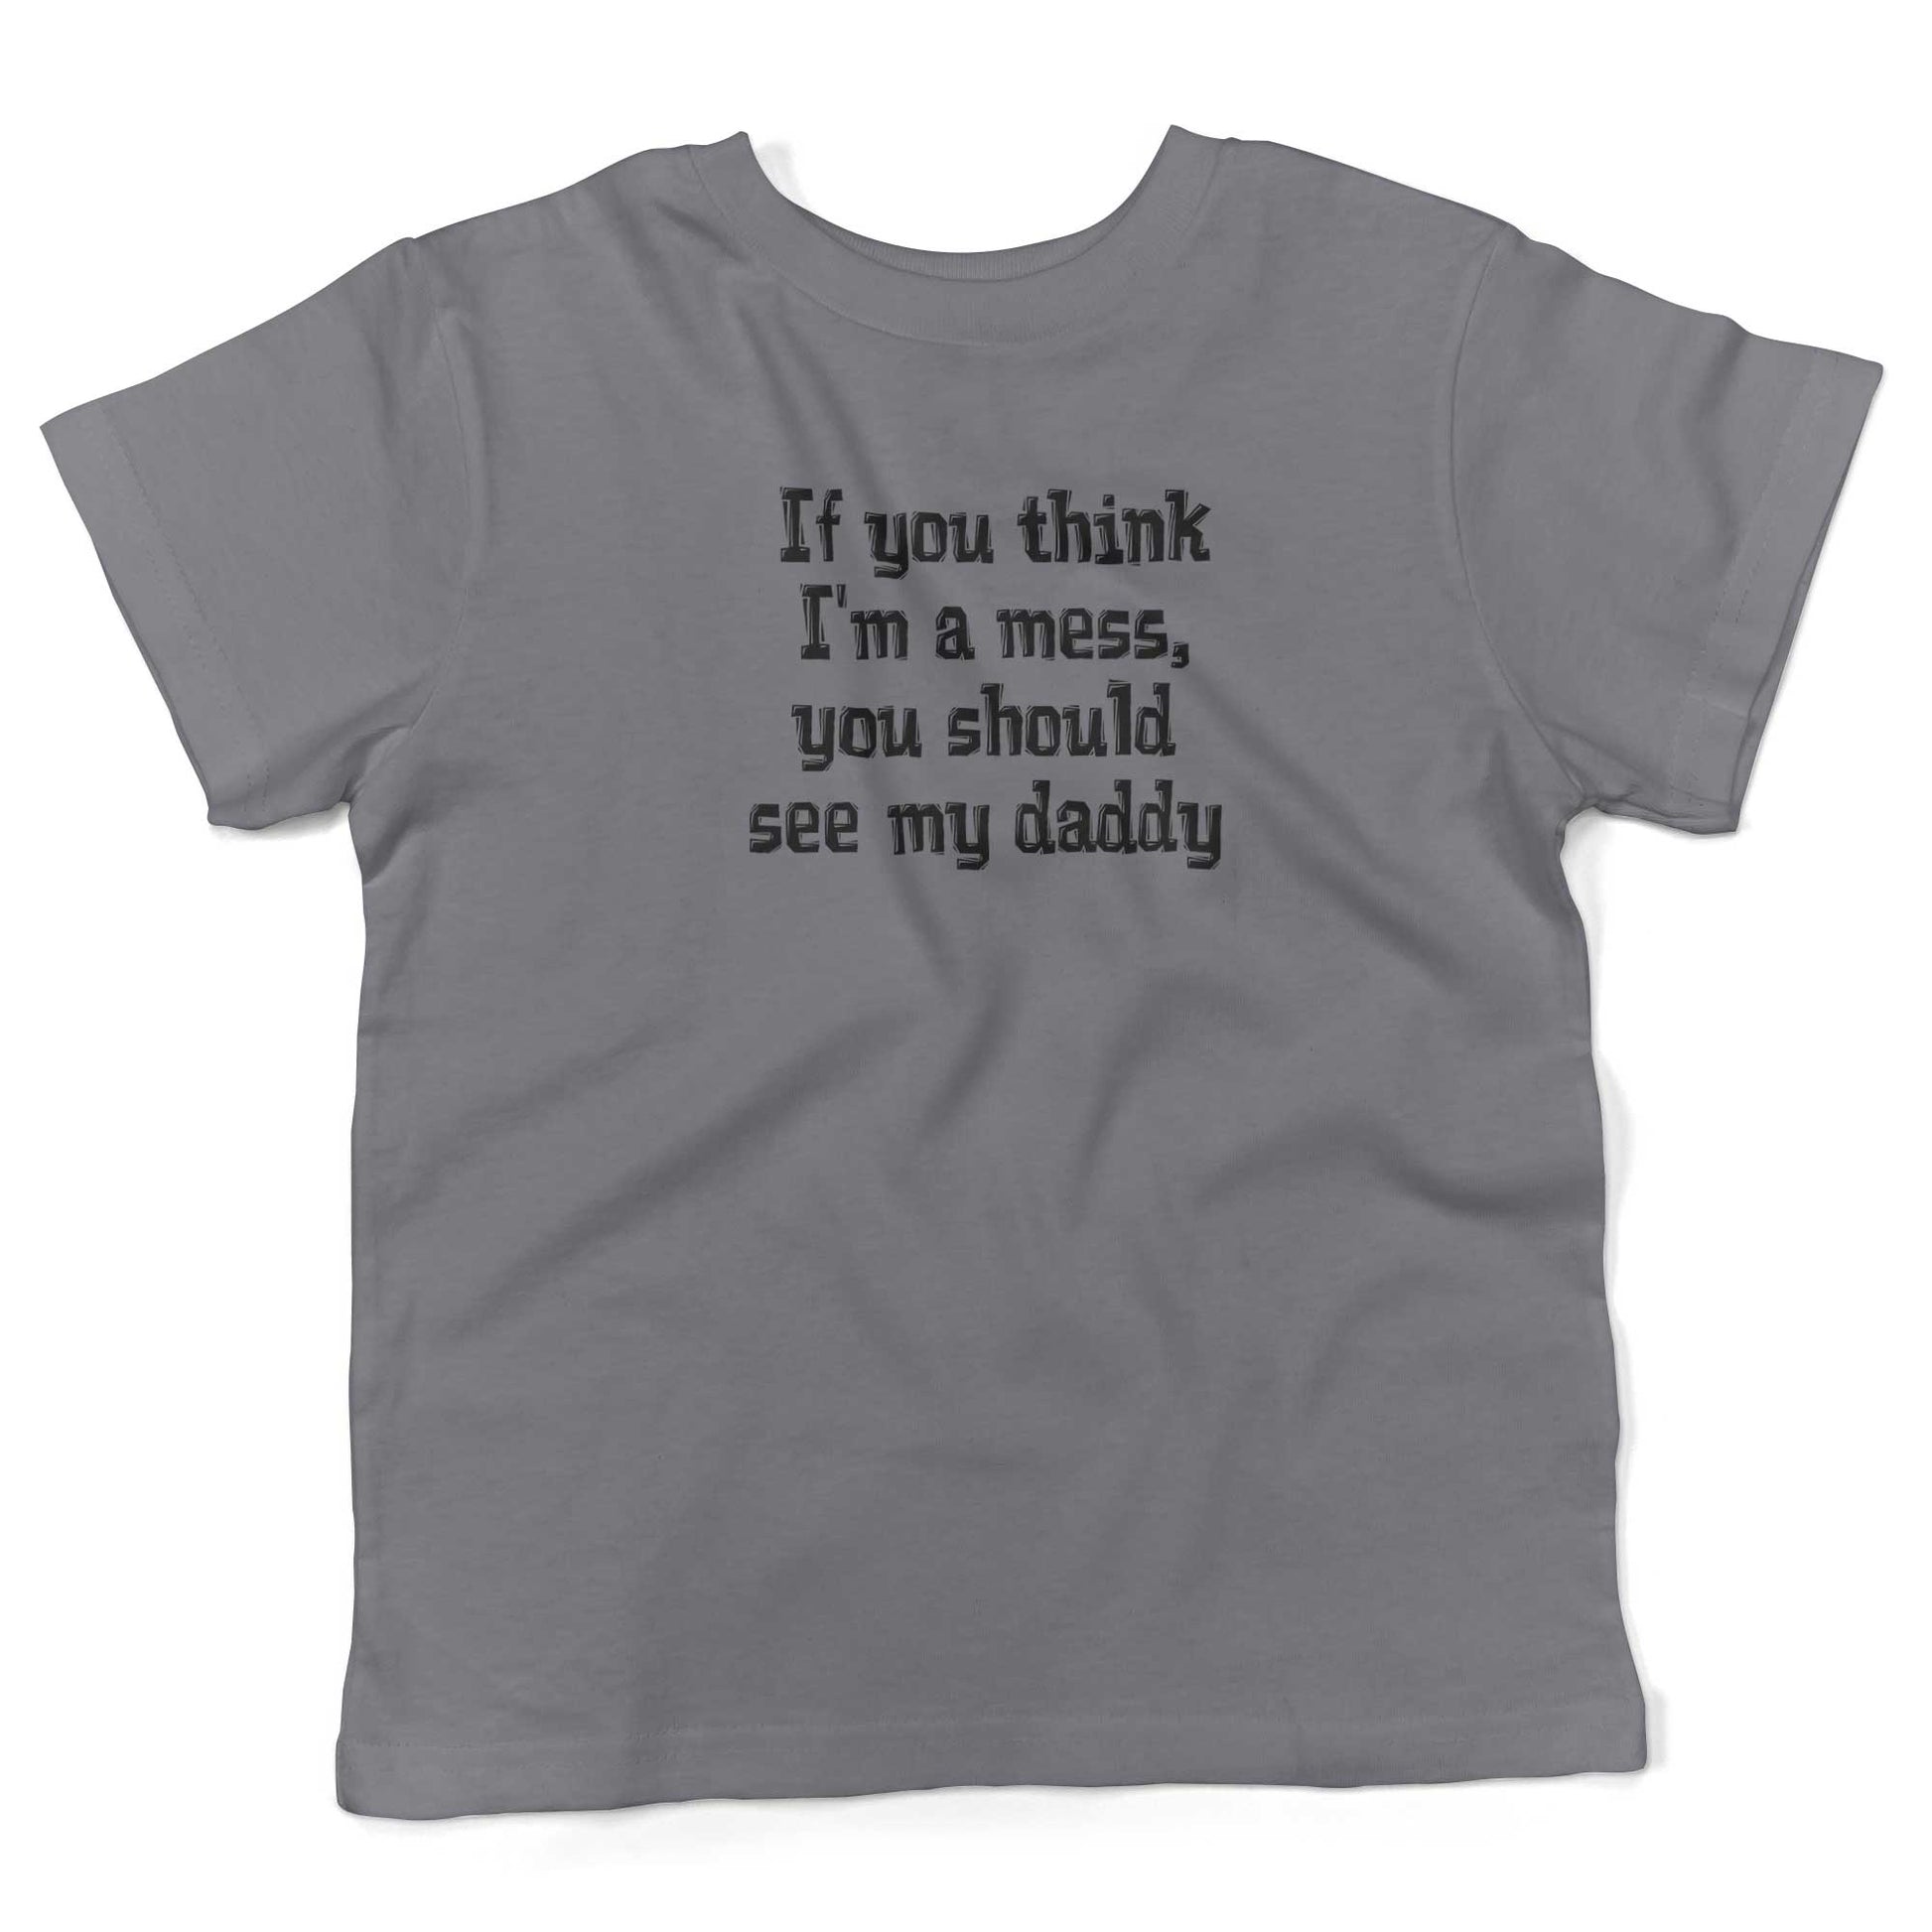 If You Think I'm A Mess, You Should See My Daddy Toddler Shirt-Slate-2T